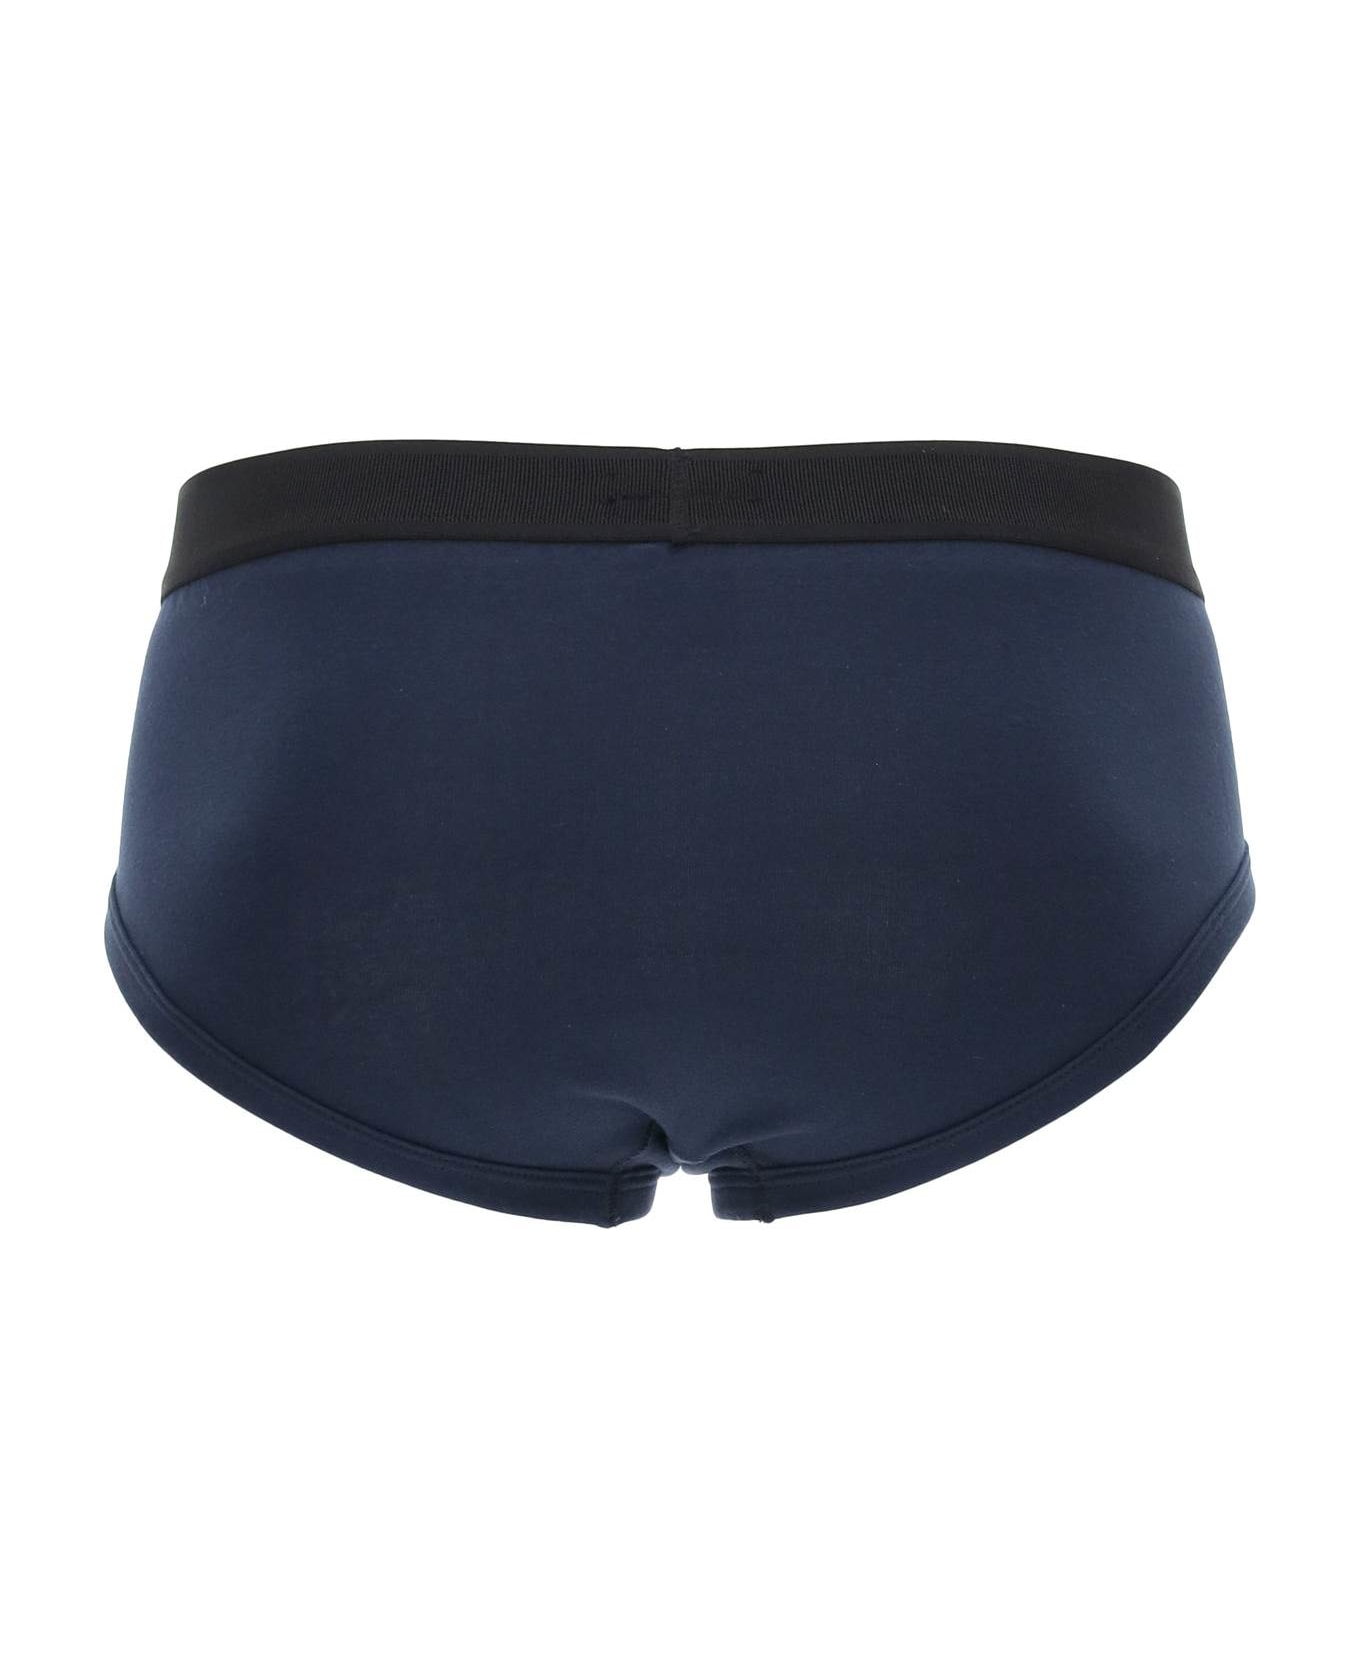 Tom Ford Cotton Briefs With Elastic Band - Blue